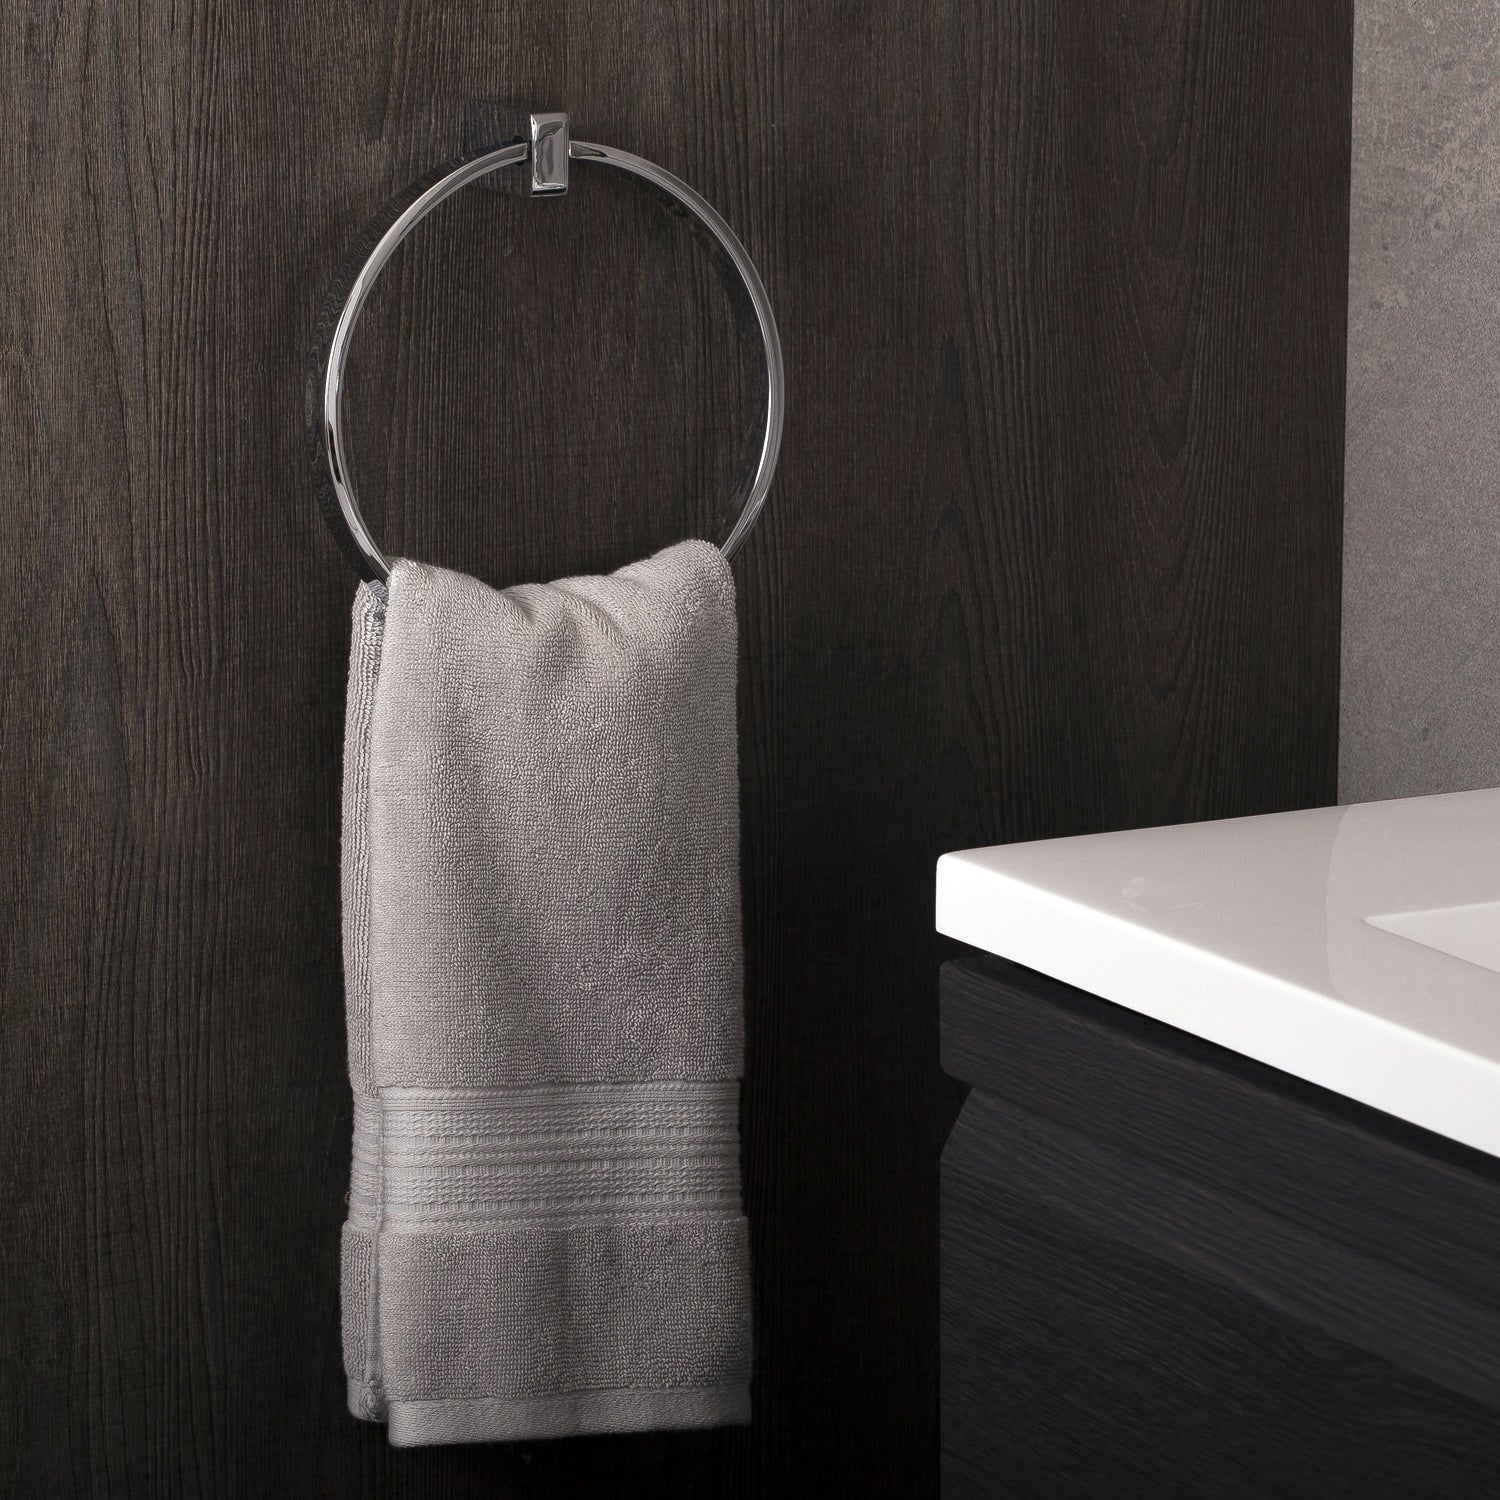 COSMIC Extreme Towel Ring, Wall Mount, Brass Body, Chrome Finish, 8-1/4 x 8-7/8 x 2-3/16 Inches (2530171)